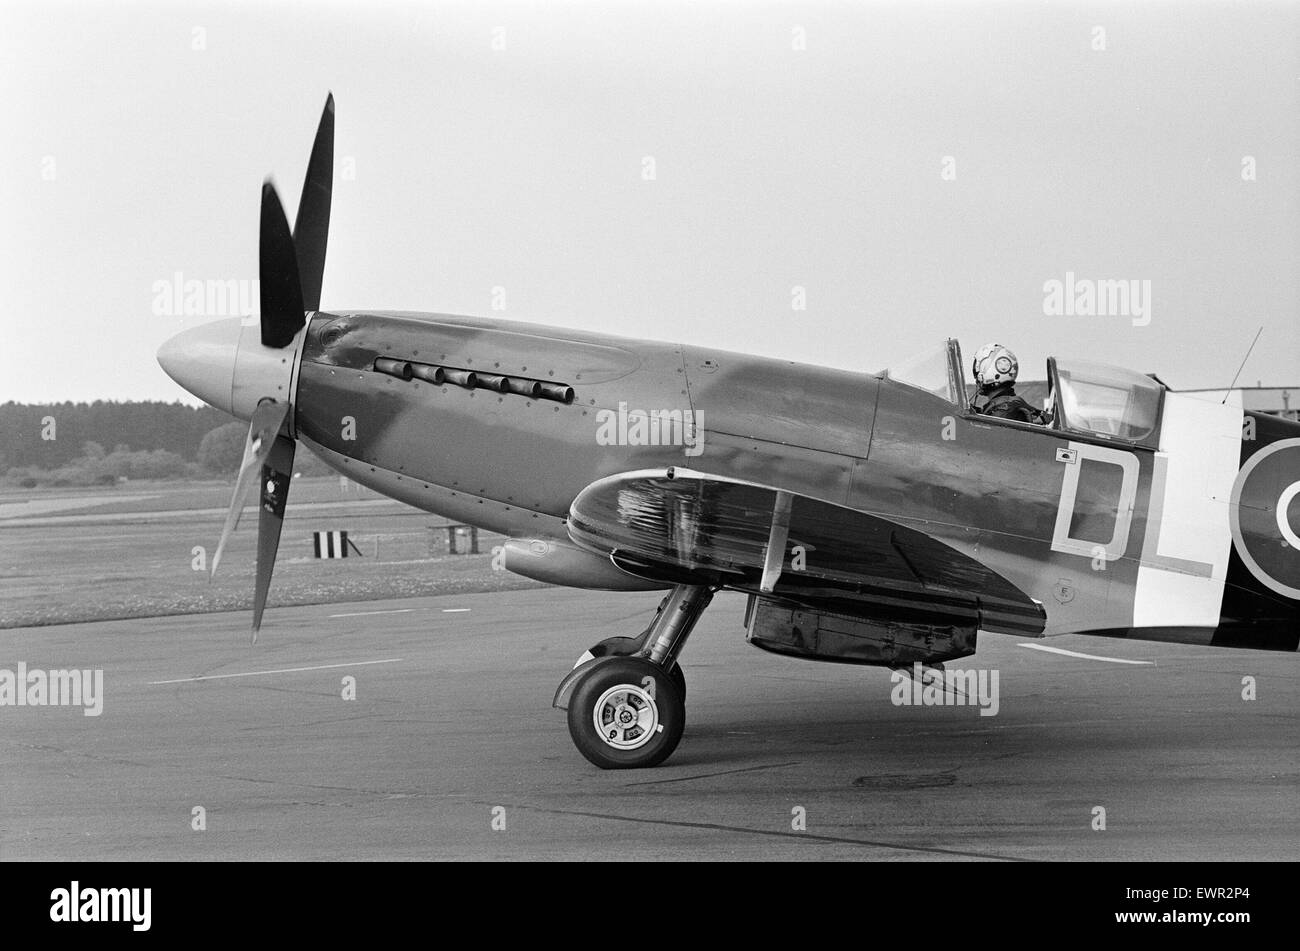 Spitfire single seat fighter aircraft on show at RAF Woodvale, South of Southport, Merseyside, 10th June 1987. Spitfire Mk.PRXIX PM631. Type: VS390. Serial PM631. 91 DL E. Stock Photo